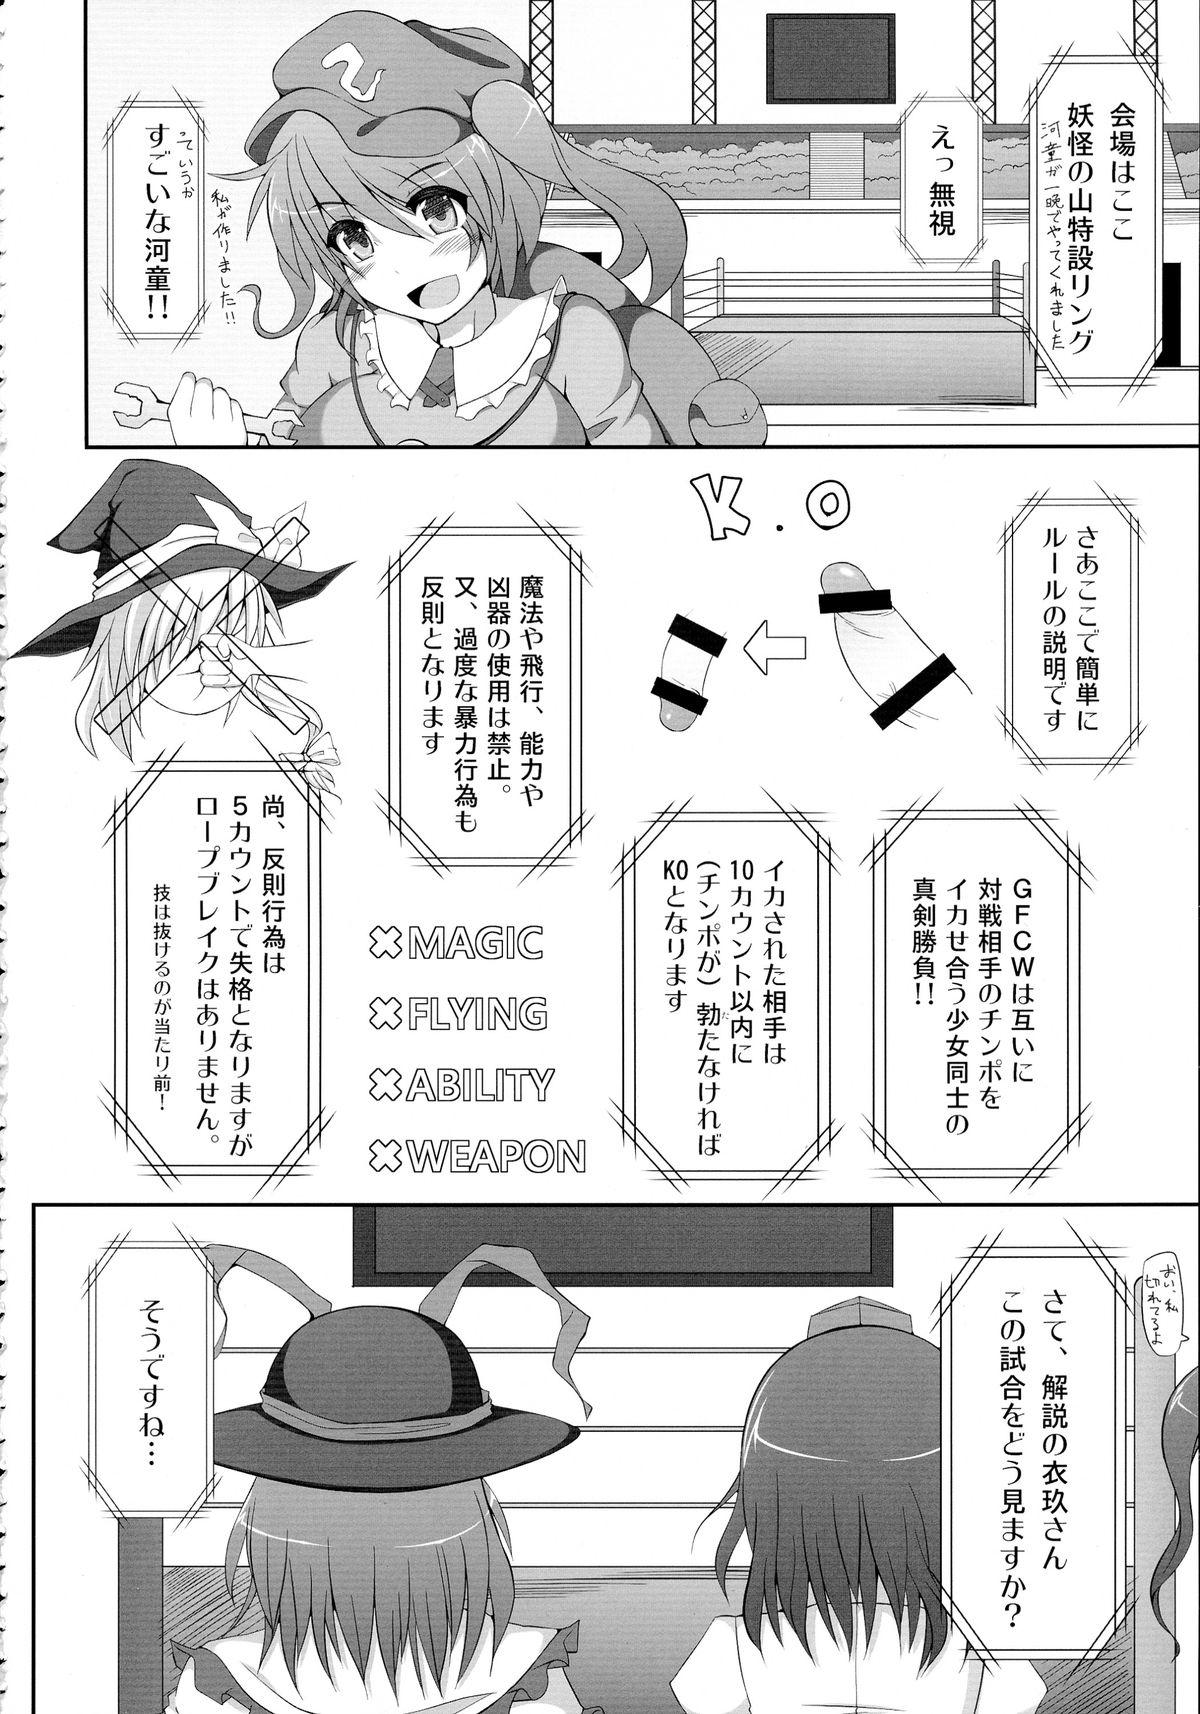 For Gensoukyou Futanari Chinpo Wrestling 123 GFCW BEST BOUT - Touhou project Tribute - Page 6